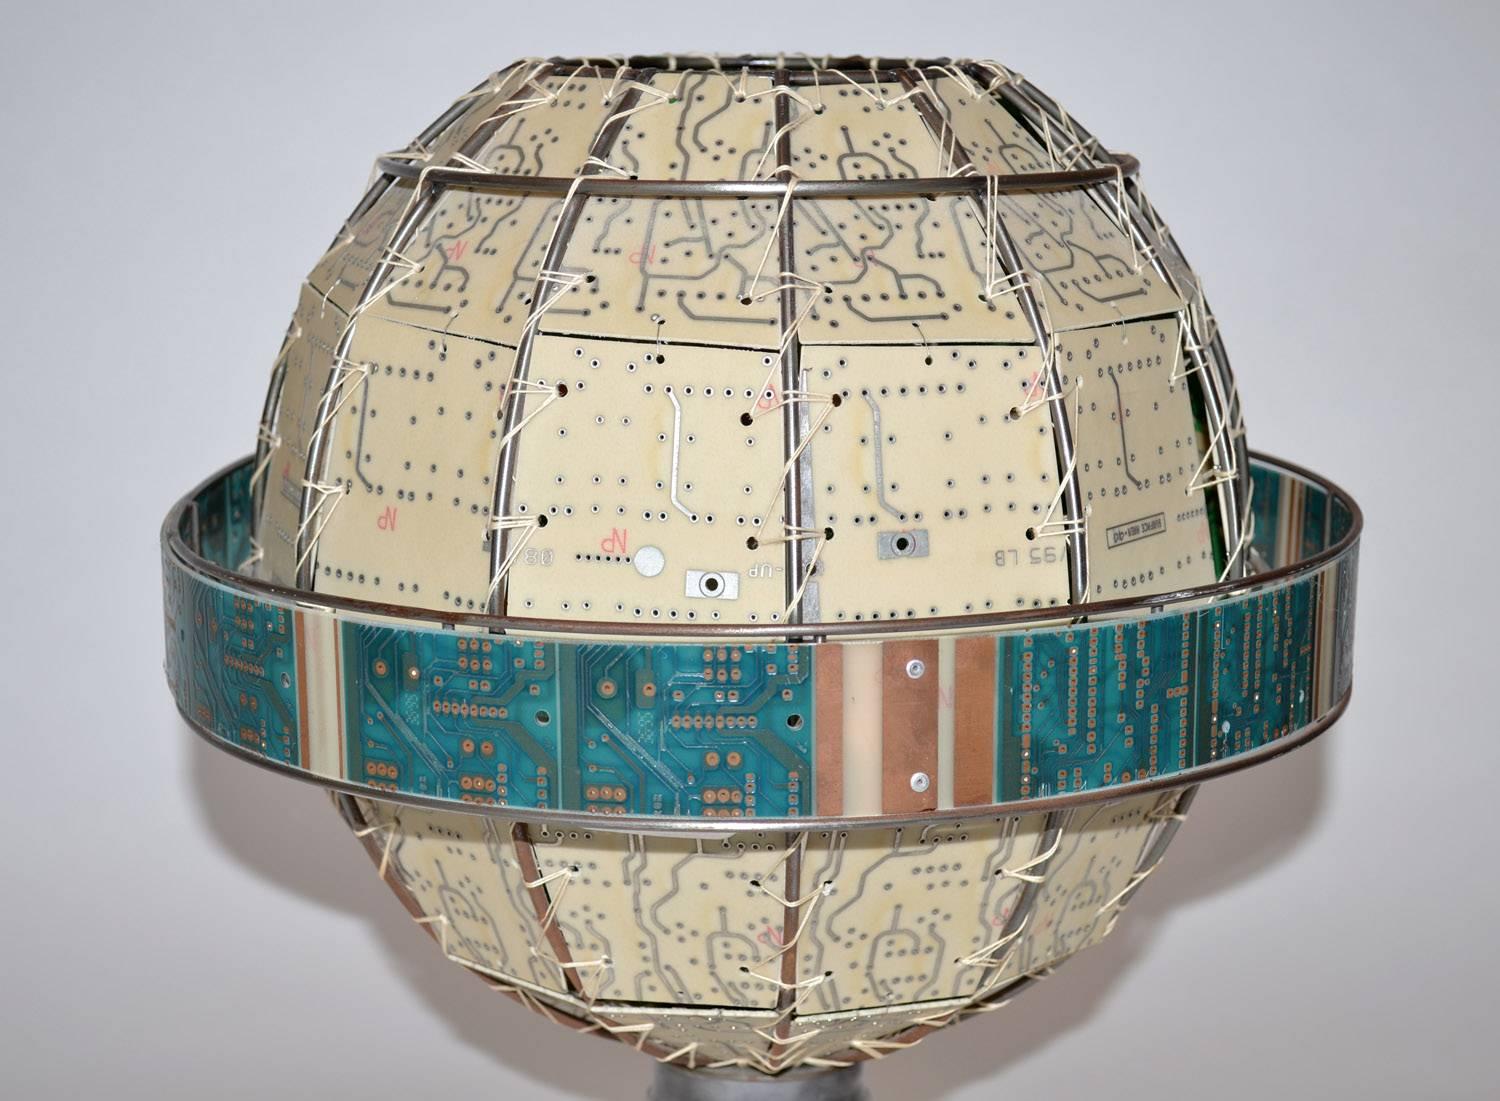 Unique Studio Circuit Board Globe Table Lamp, Signed, USA, 1990's. One-off globe-shaped table or desk lamp comprised of weaved circuit board panels on welded wire frame, laced construction, internal light on legs of medical/ industrial stainless